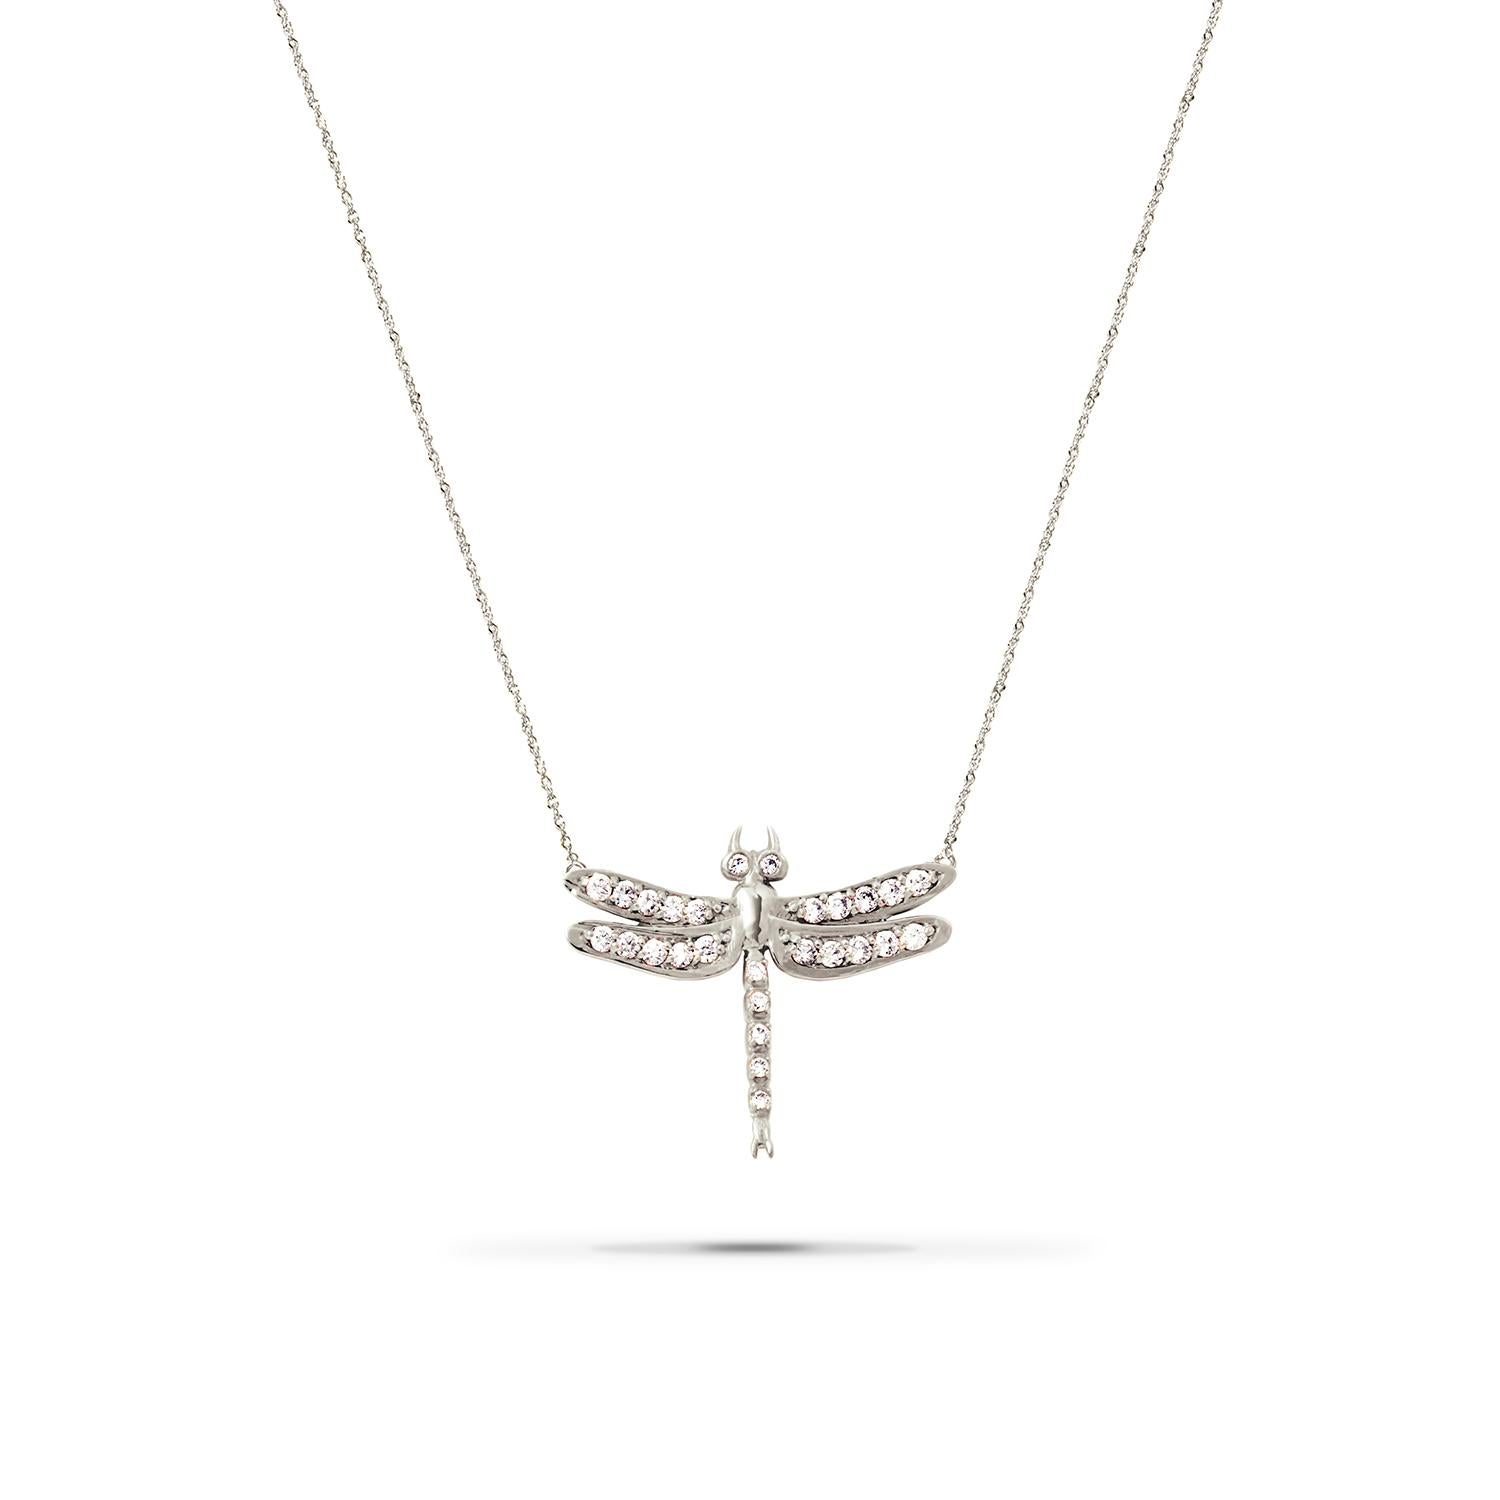 Women's Small Dragonfly Diamond Necklace / White Gold For Sale